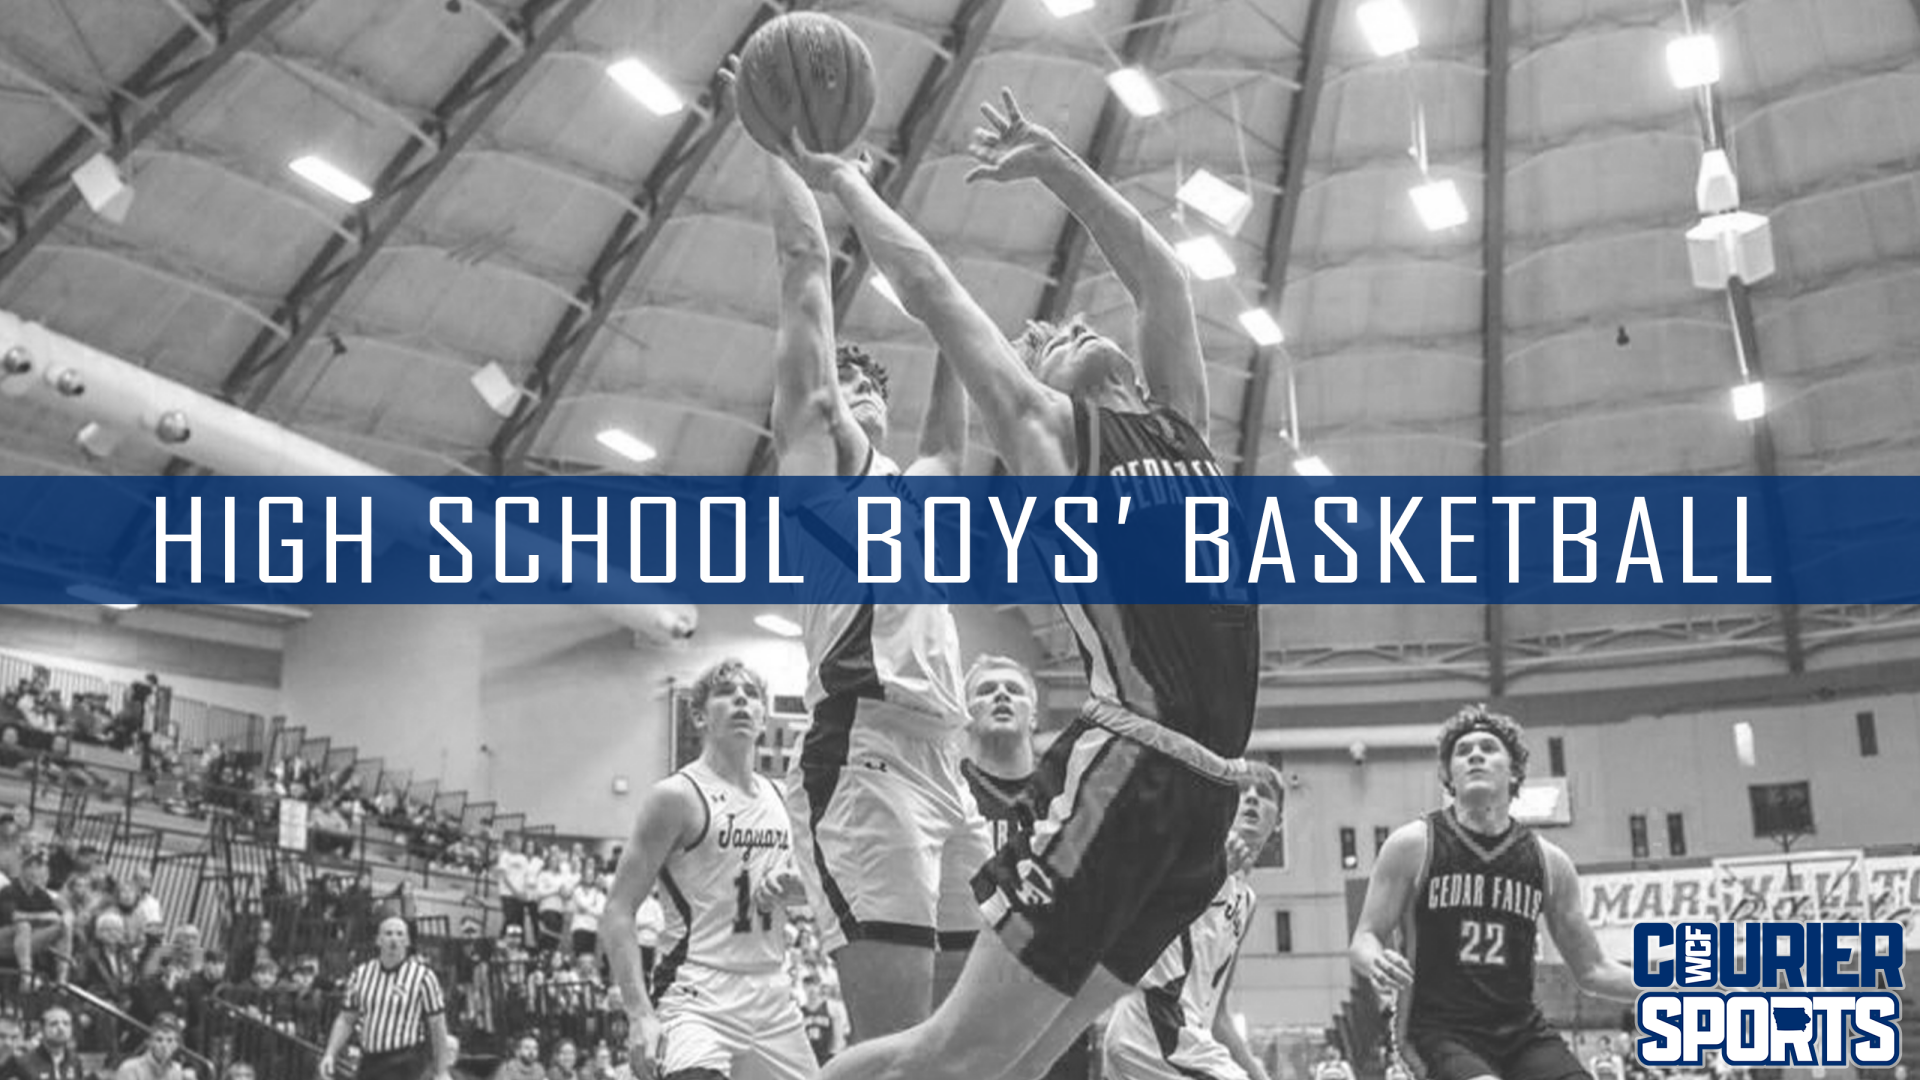 High School Basketball Scores: Exciting Matchups and Close Games in Iowa